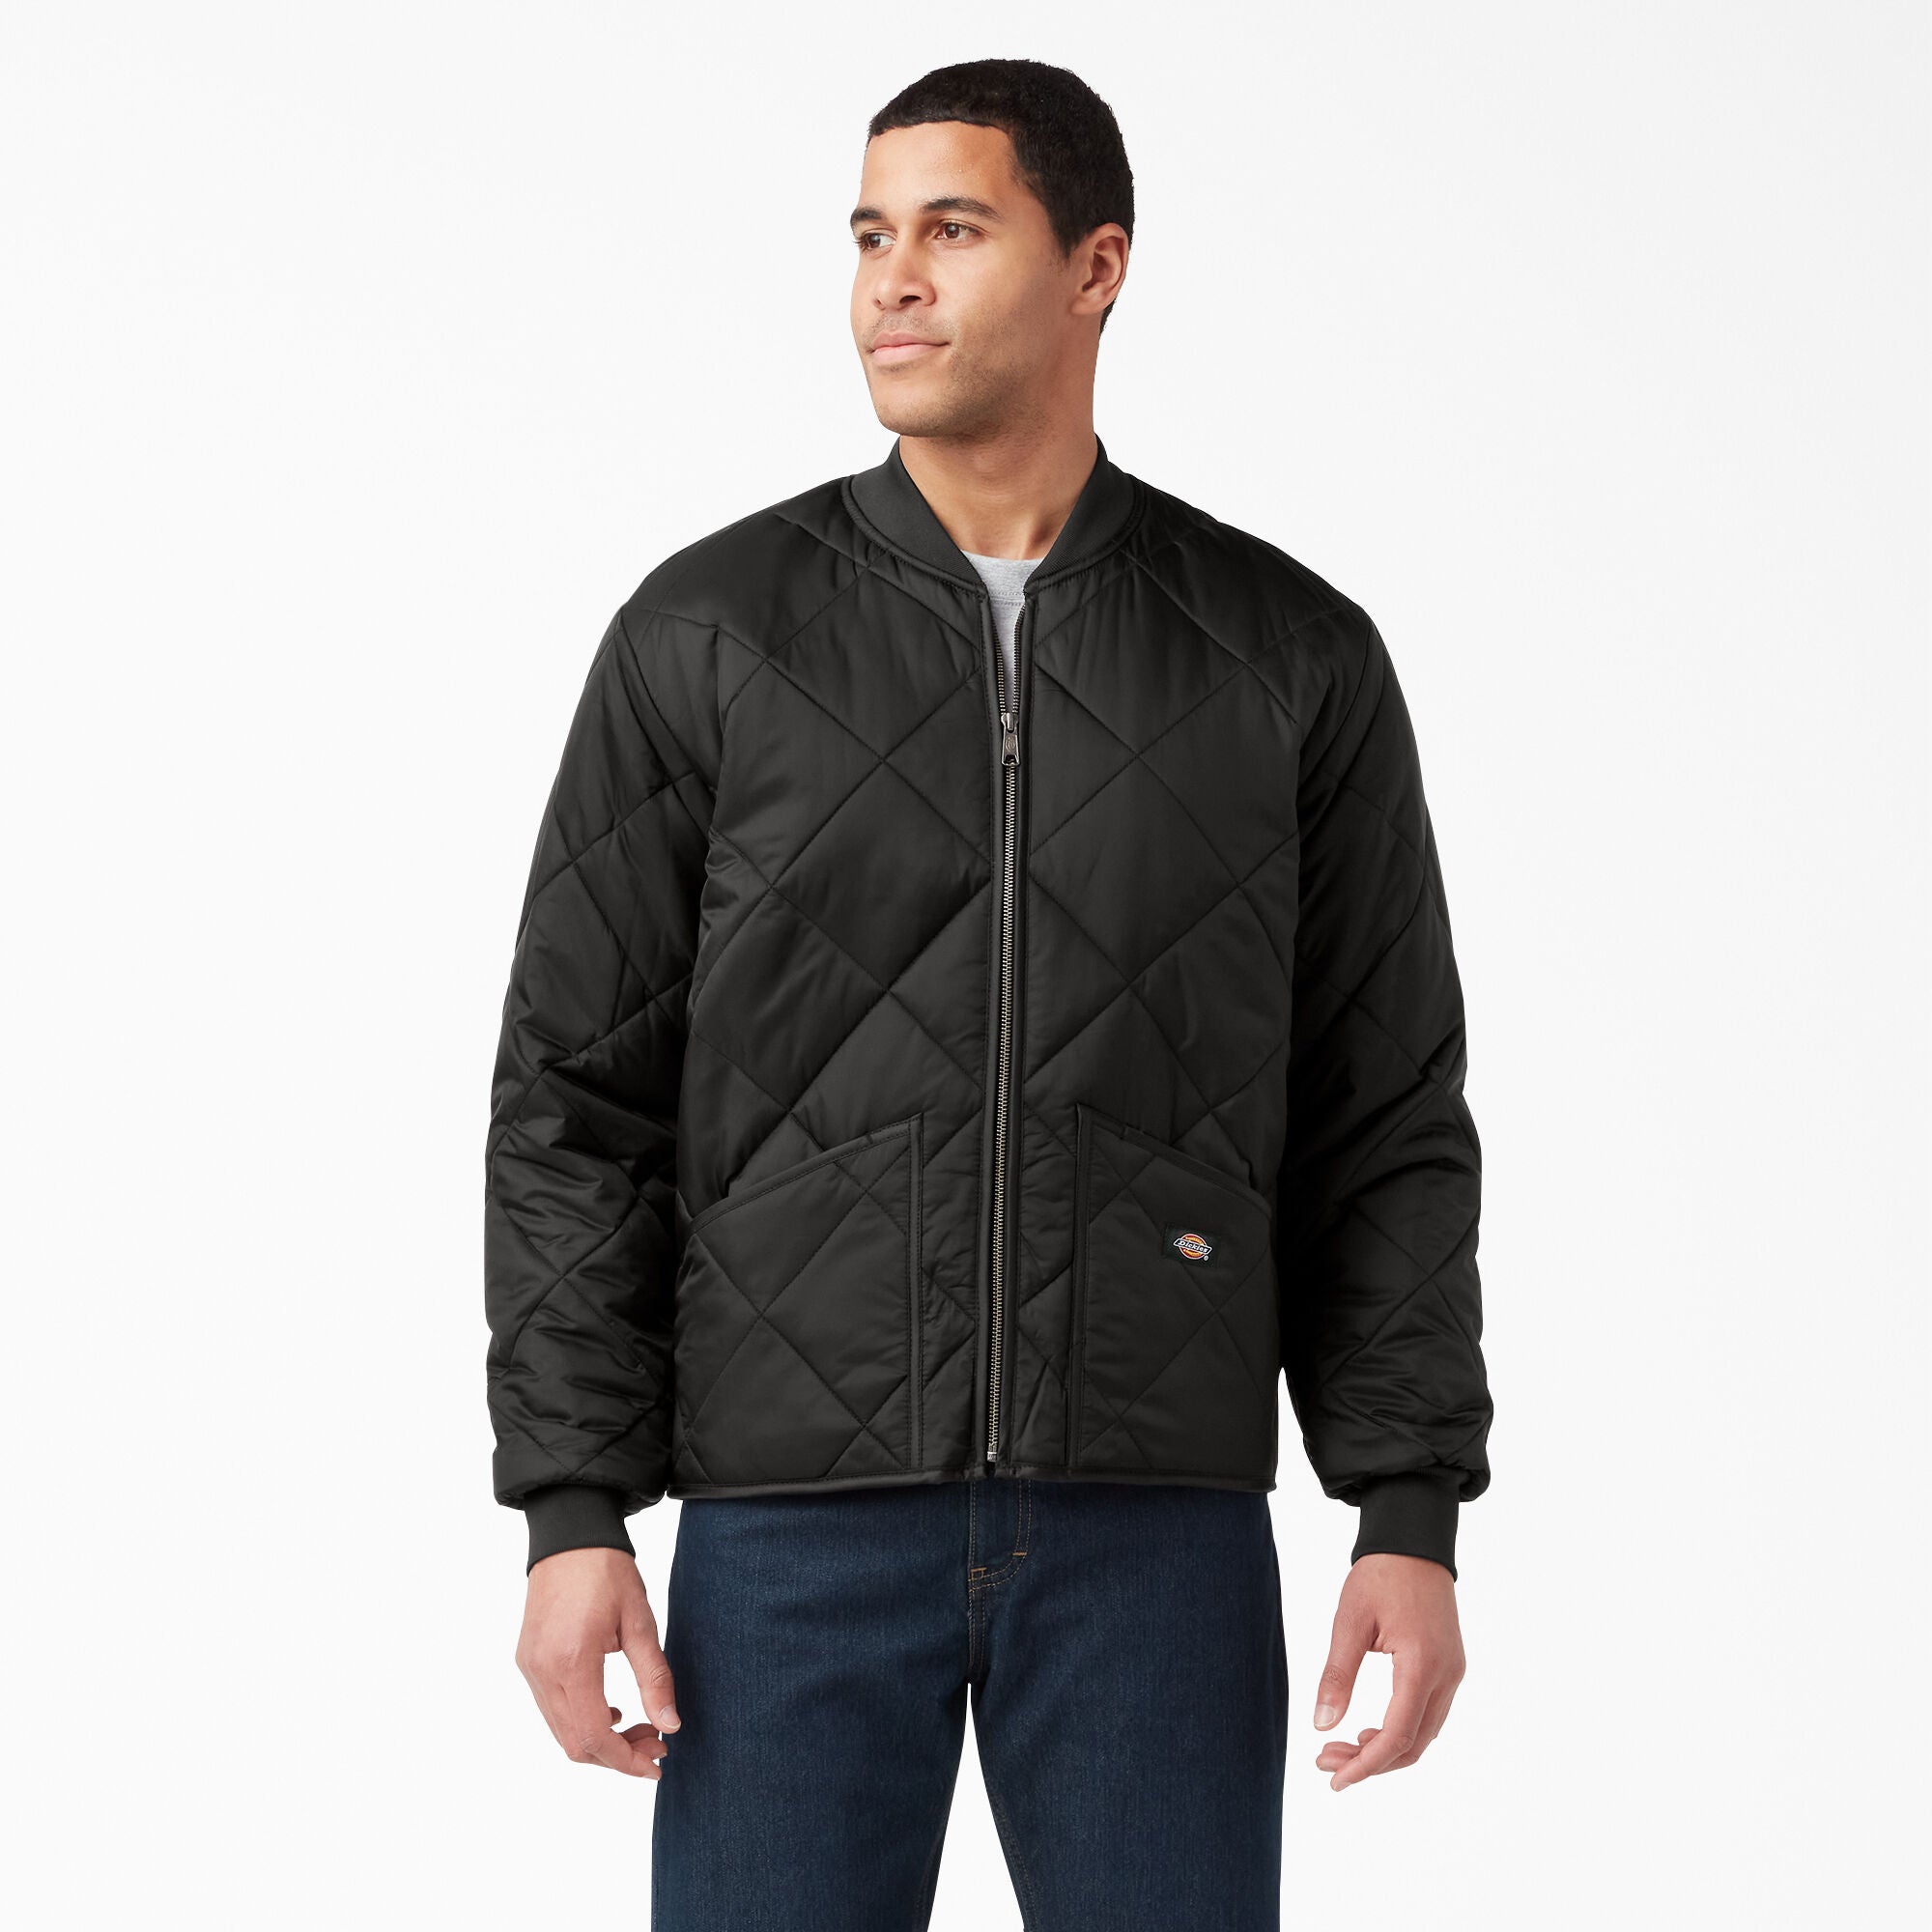 Buy Calvin Klein Men's Reversible Diamond Quilted Jacket, Olive, XX-Large  at Amazon.in